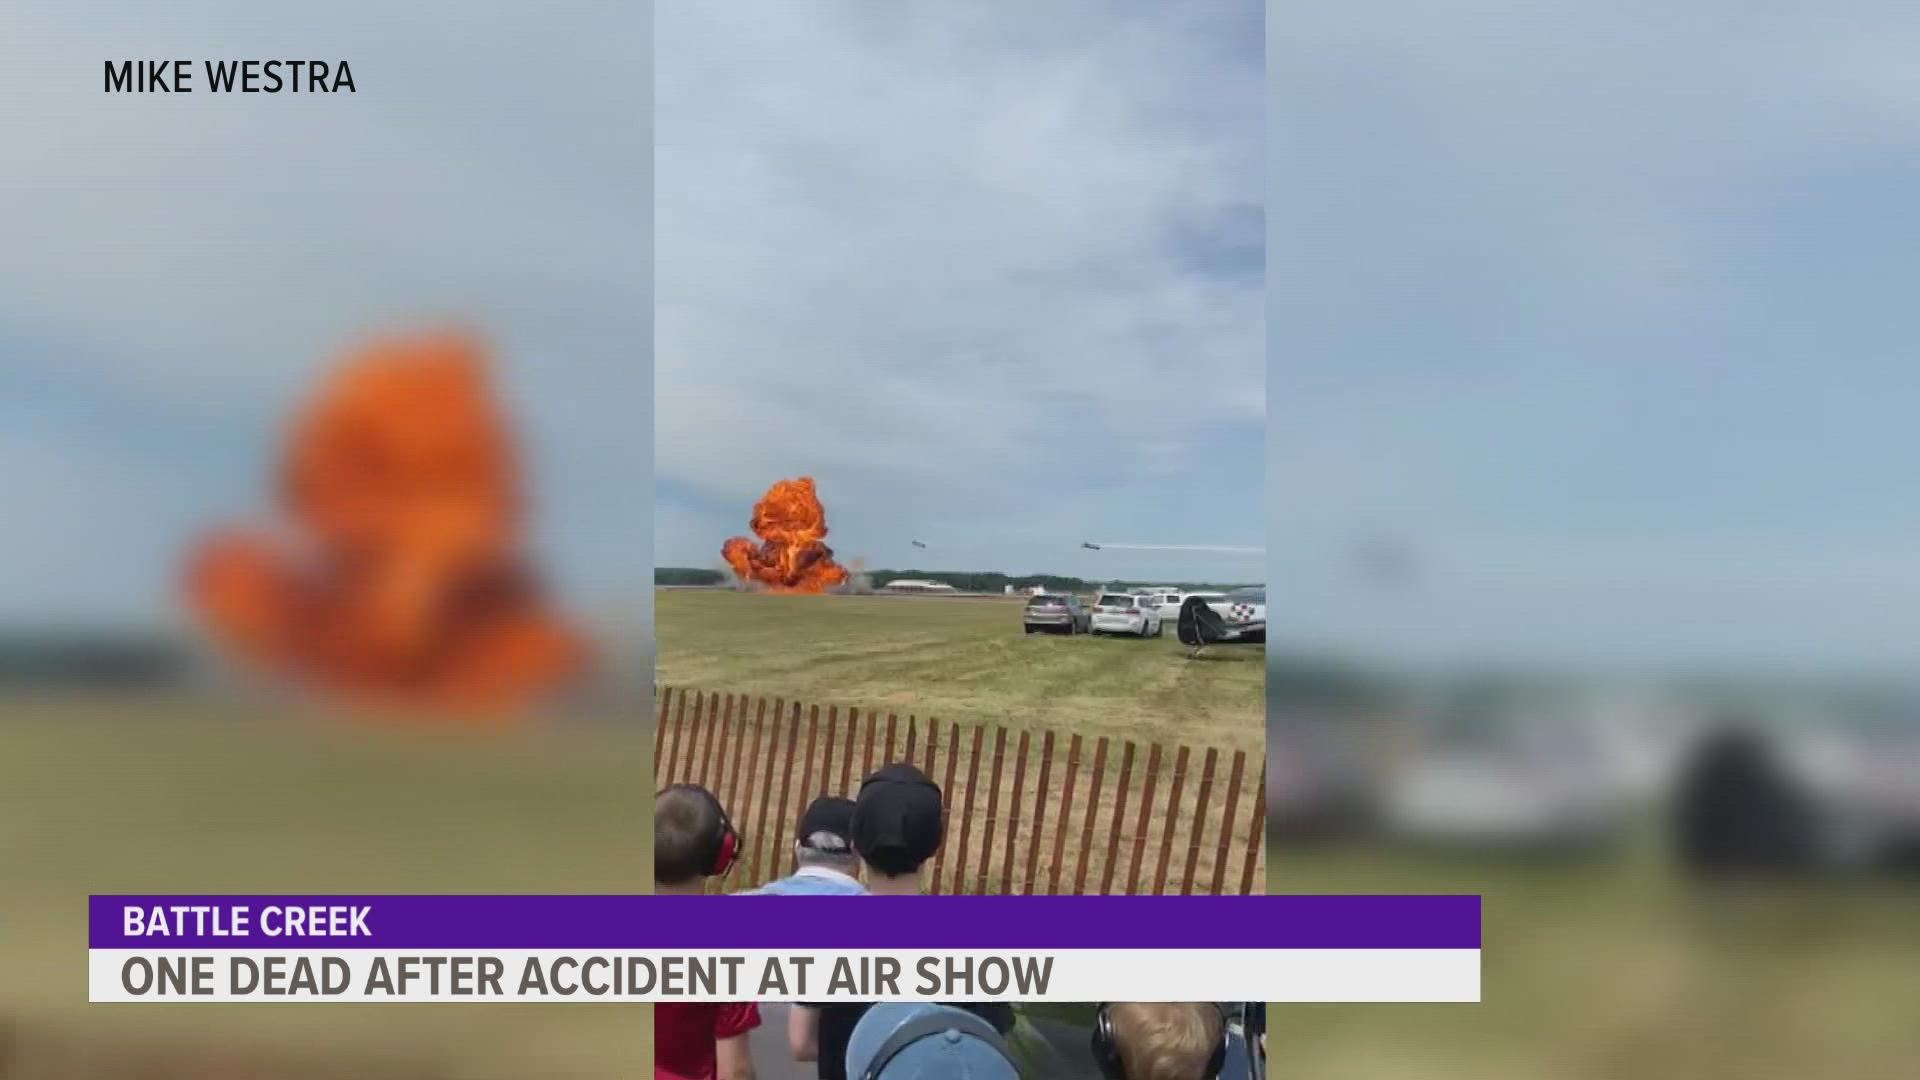 The victim who died after an accident at the Battle Creek Field of Flight Air Show and Balloon Festival has been identified as 40-year-old Chris Darnell.